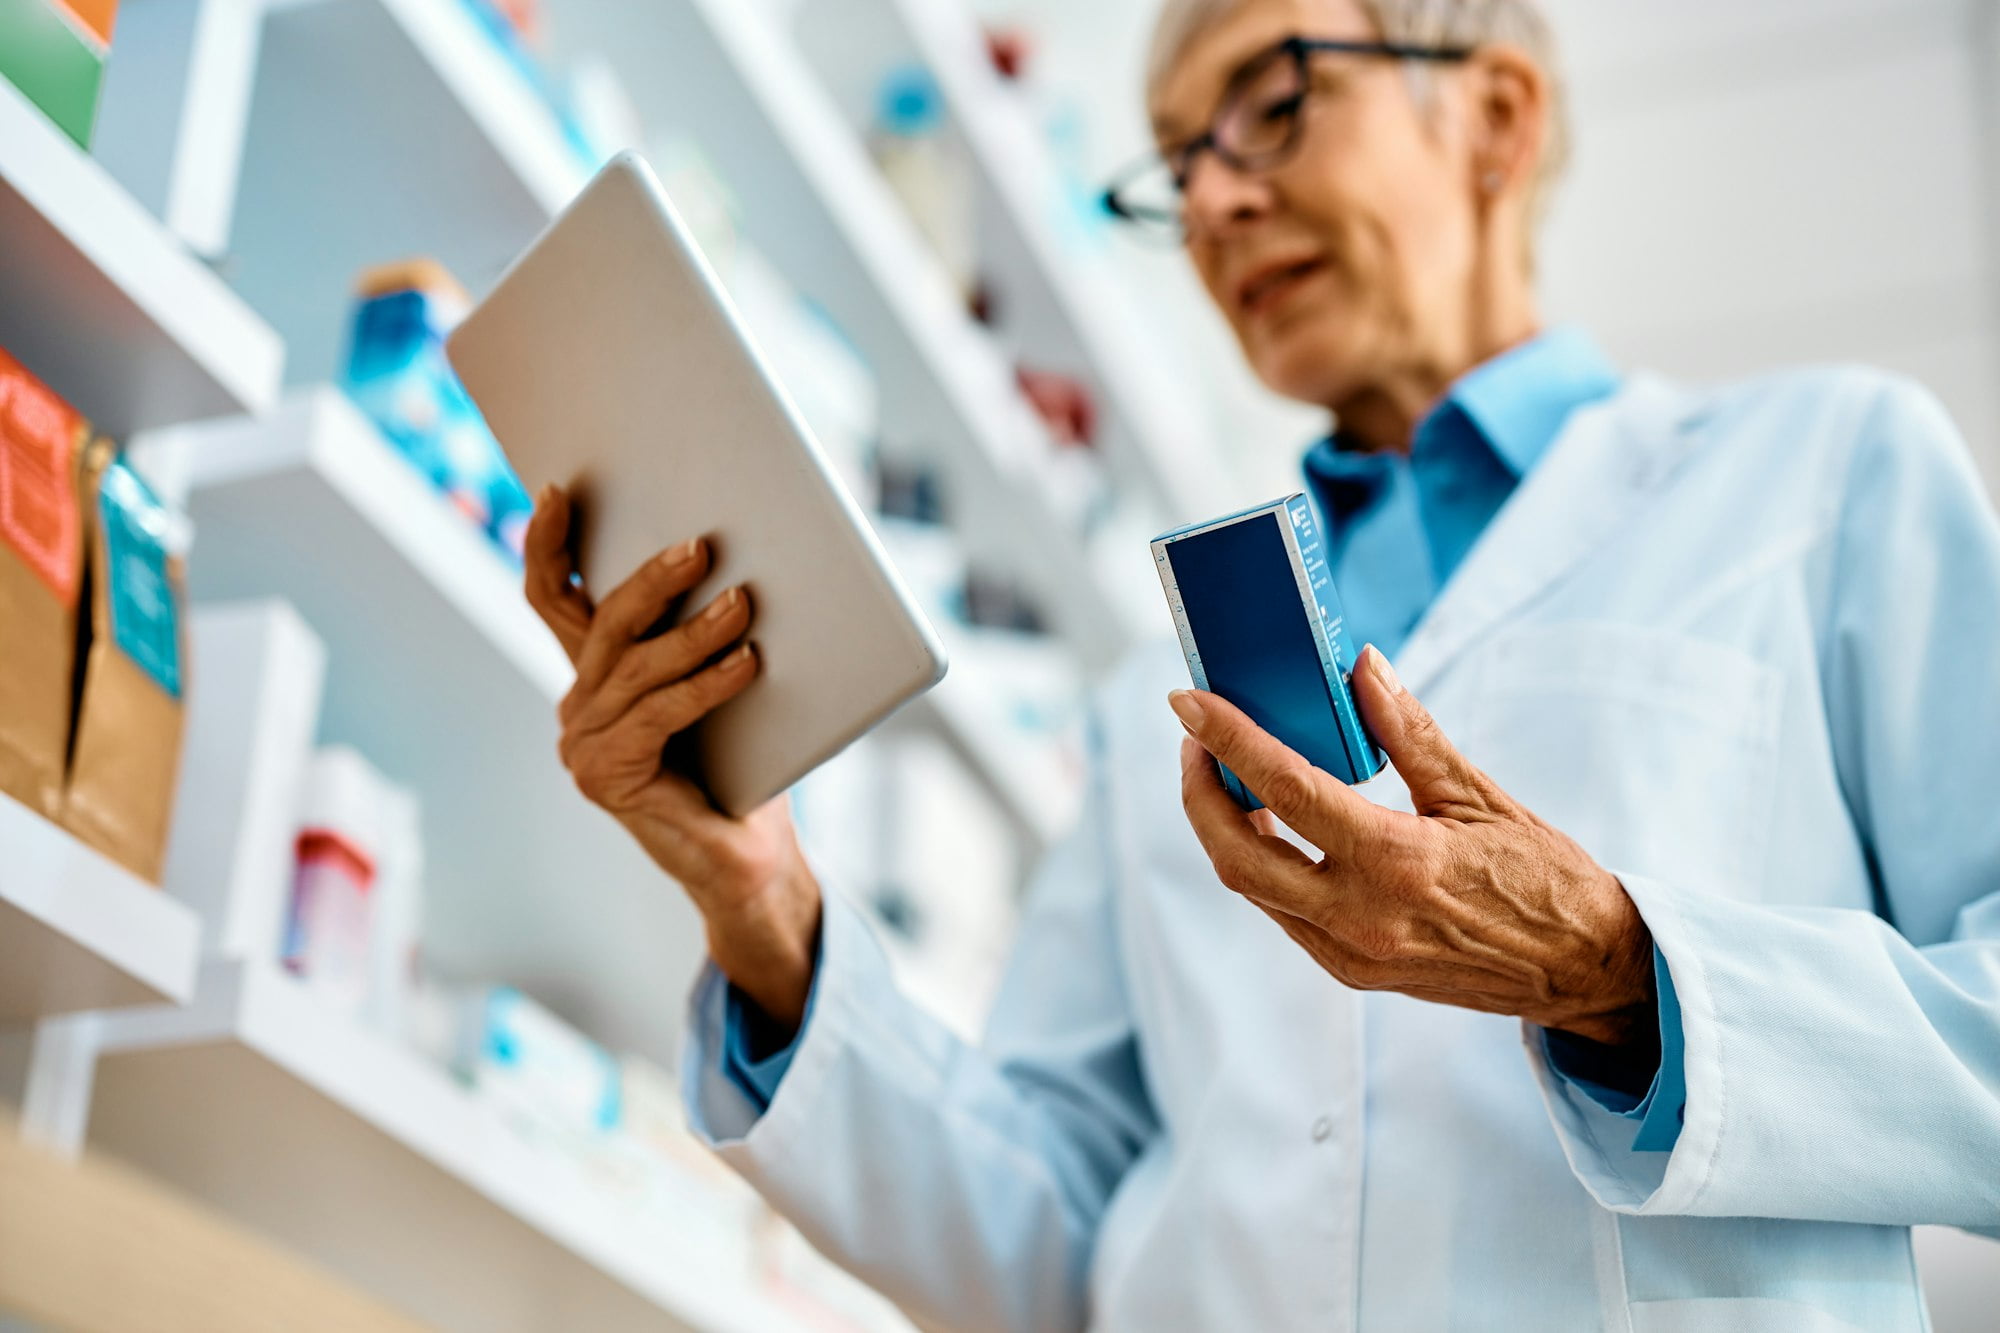 Close up of pharmacist checking medicine supplies while using digital tablet in drugstore.